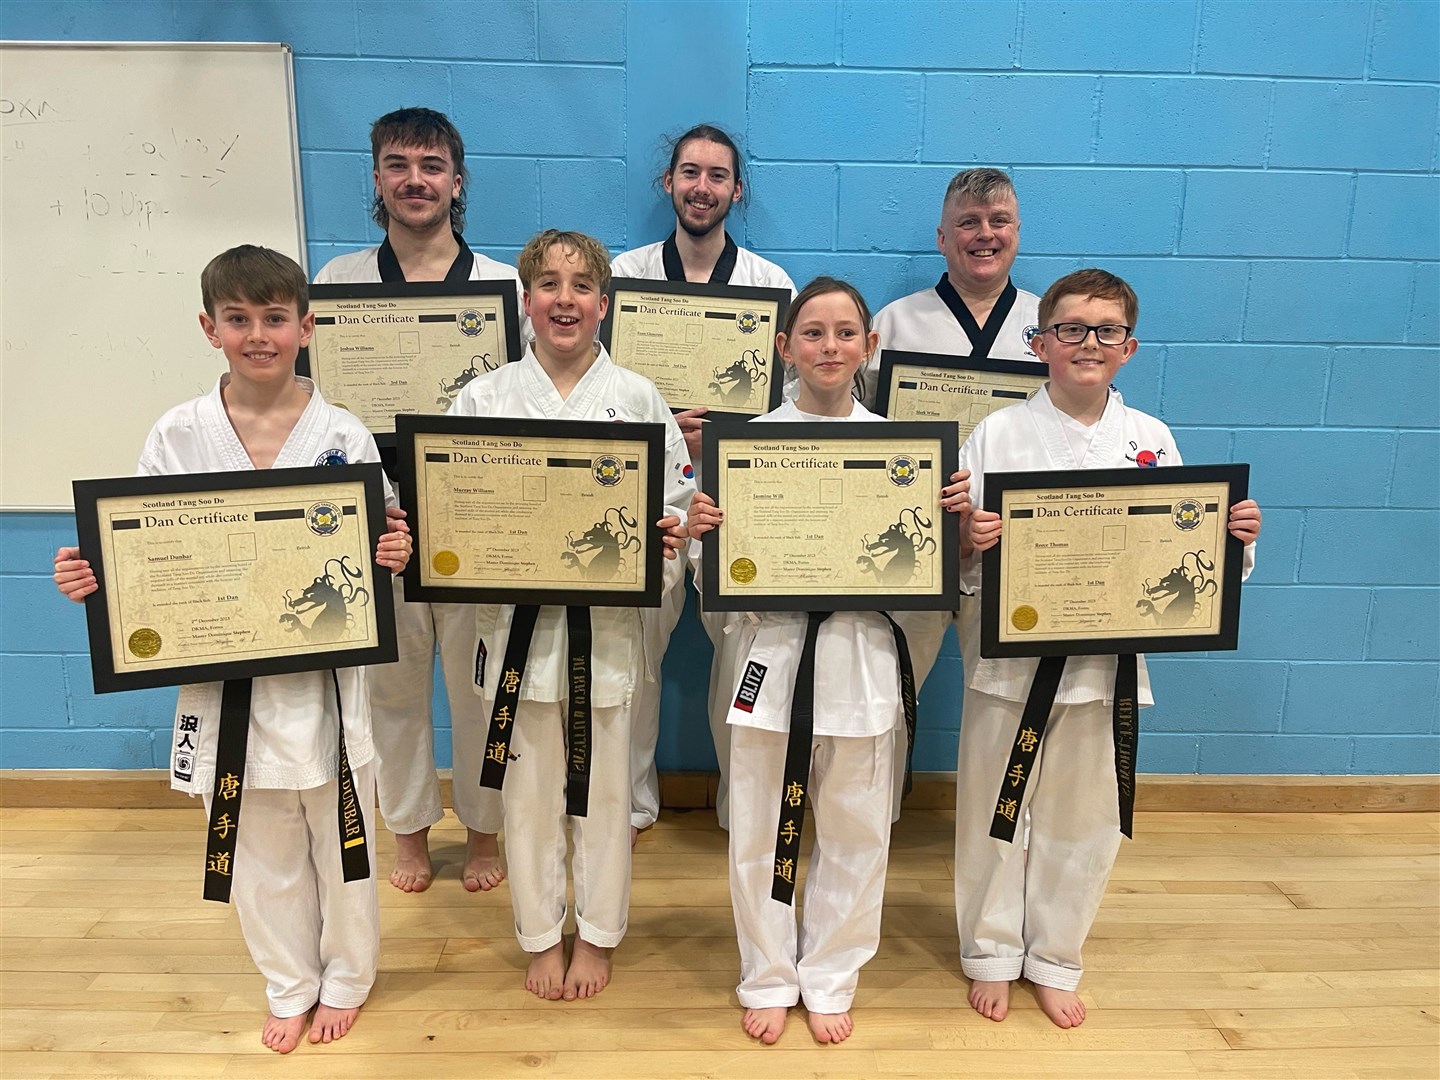 The DKMA students show off their new grades after a successful black belt testing in Inverness.